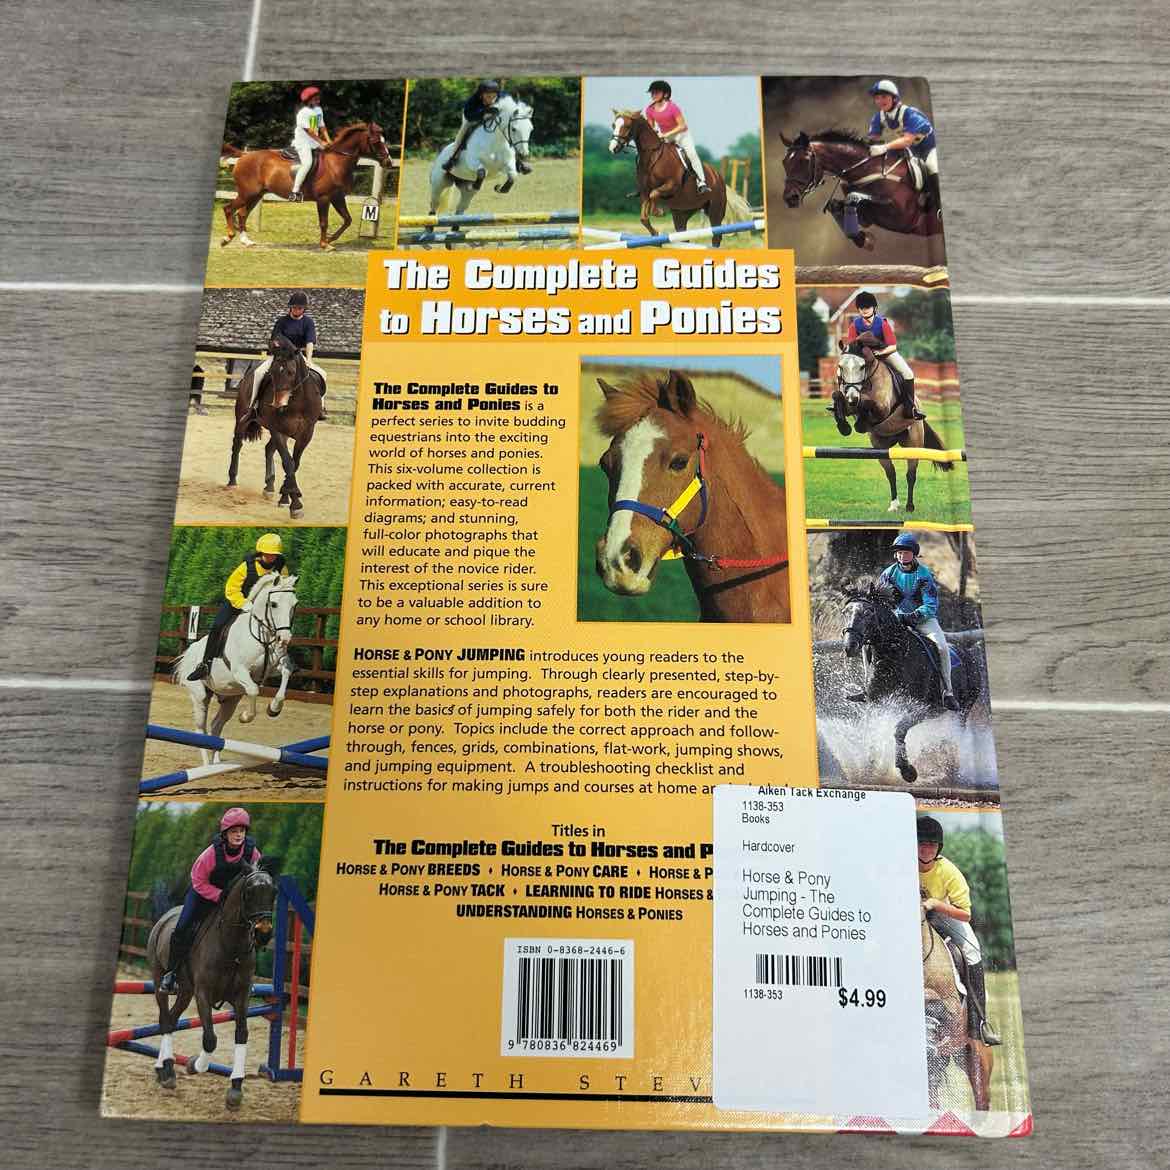 Horse & Pony Jumping - The Complete Guides to Horses and Ponies